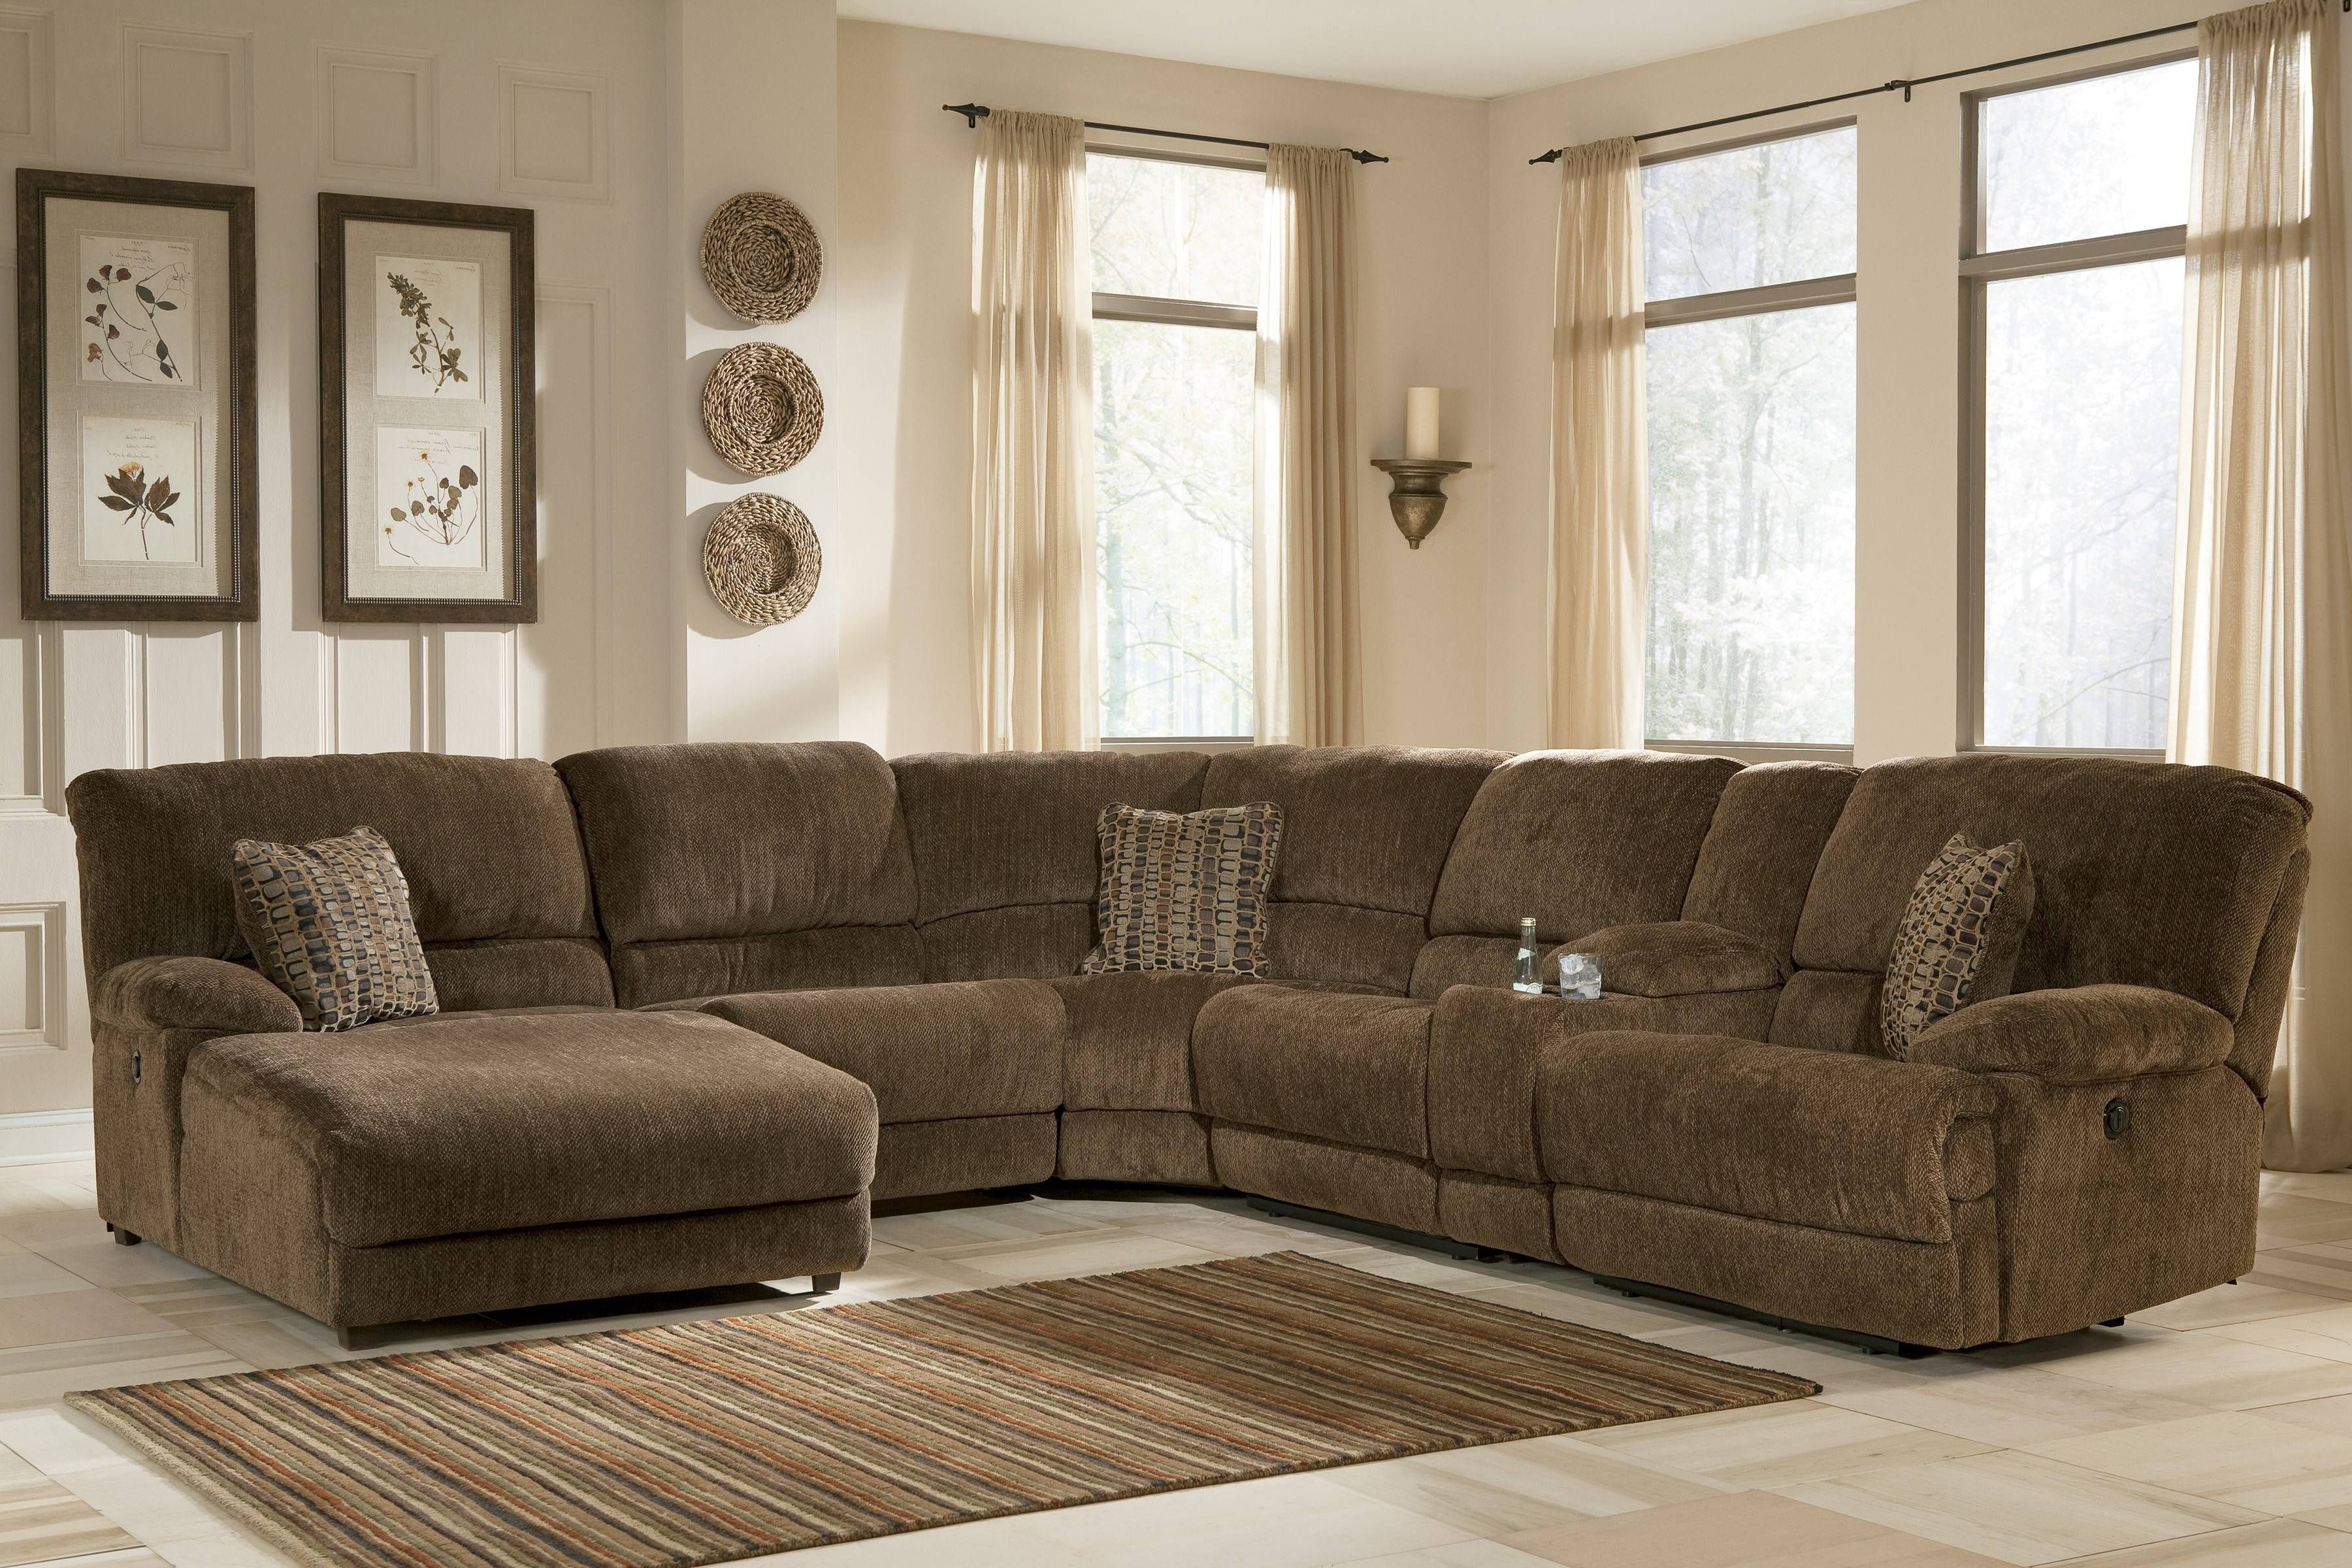 Furniture: Classic And Traditional Style Velvet Sectional Sofa For In Traditional Leather Sectional Sofas (View 14 of 15)